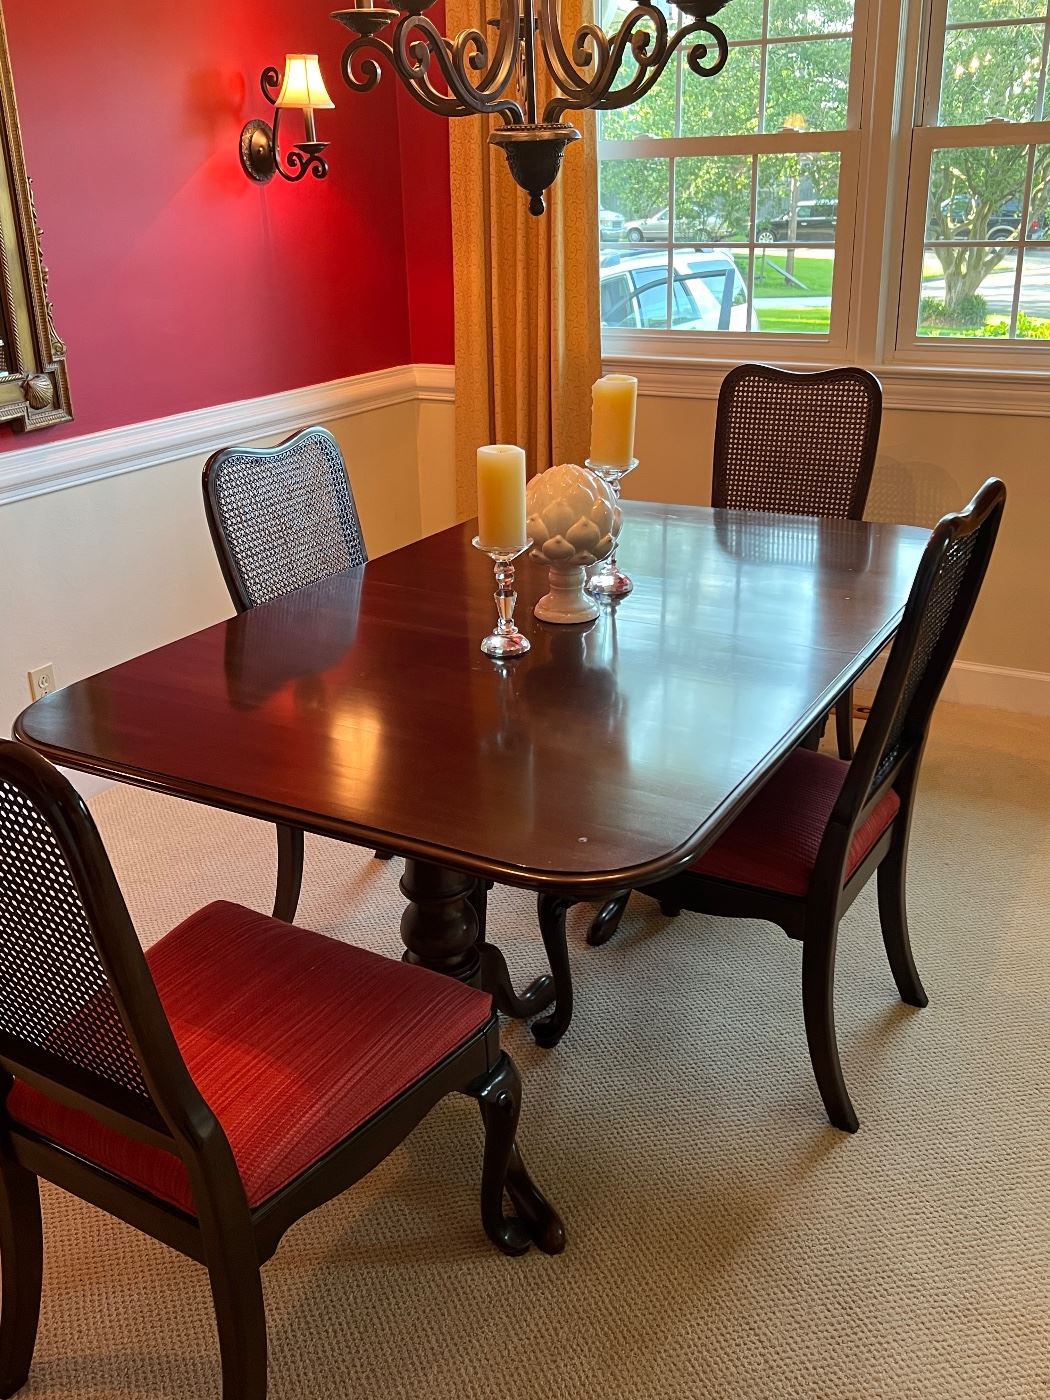 Ethan Allen Dining Room Table and Chairs (6 chairs)